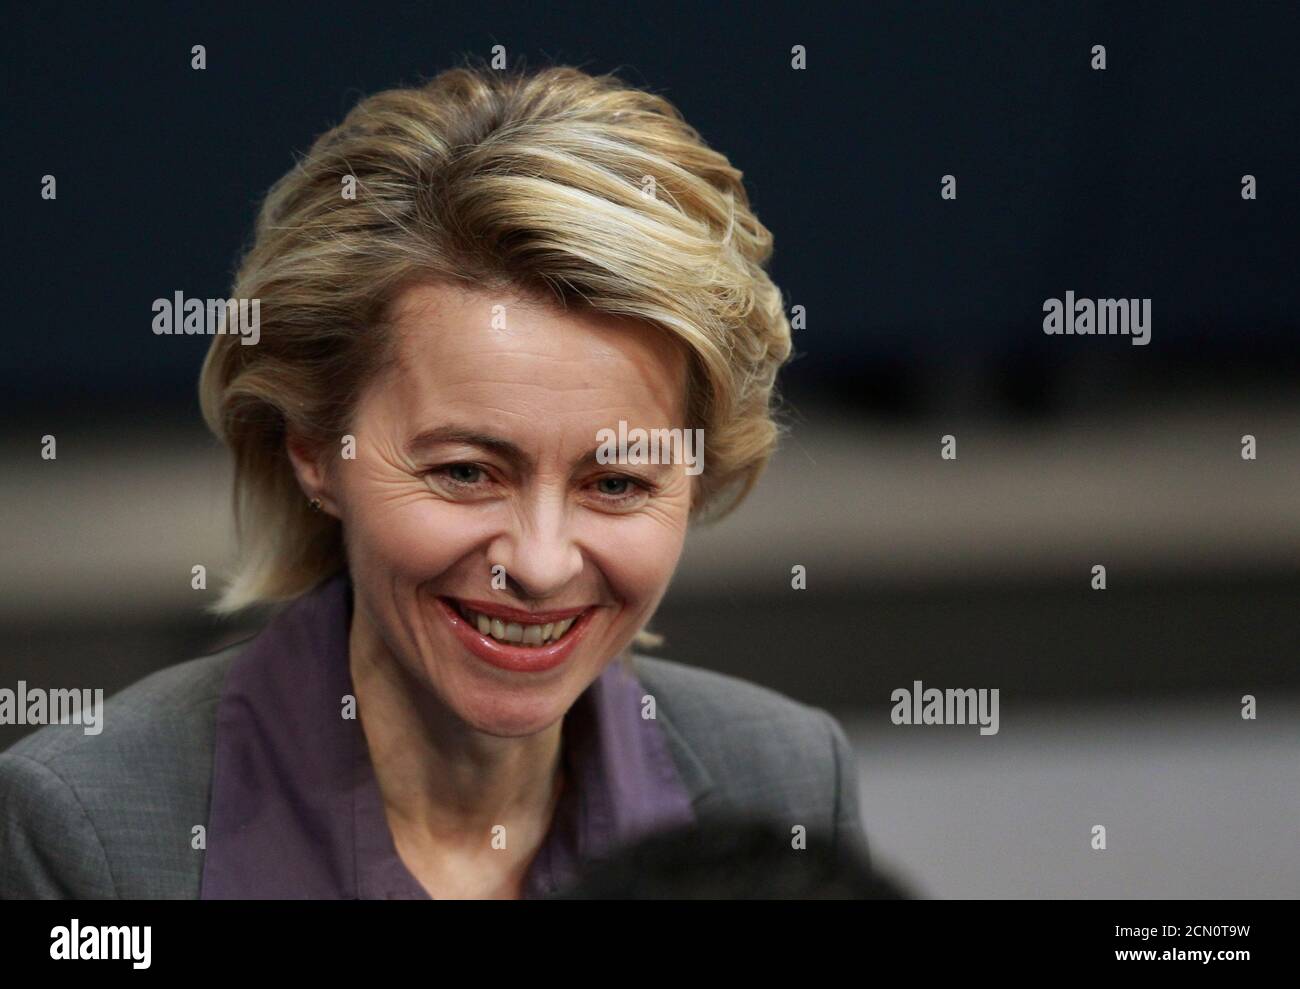 German Labour Minister Ursula von der Leyen smiles after the lower house of parliament, the Bundestag, voted on a reform of the minimum jobseekers allowance Hartz IV, in Berlin, February 25, 2011. REUTERS/Thomas Peter  (GERMANY - Tags: POLITICS) Stock Photo